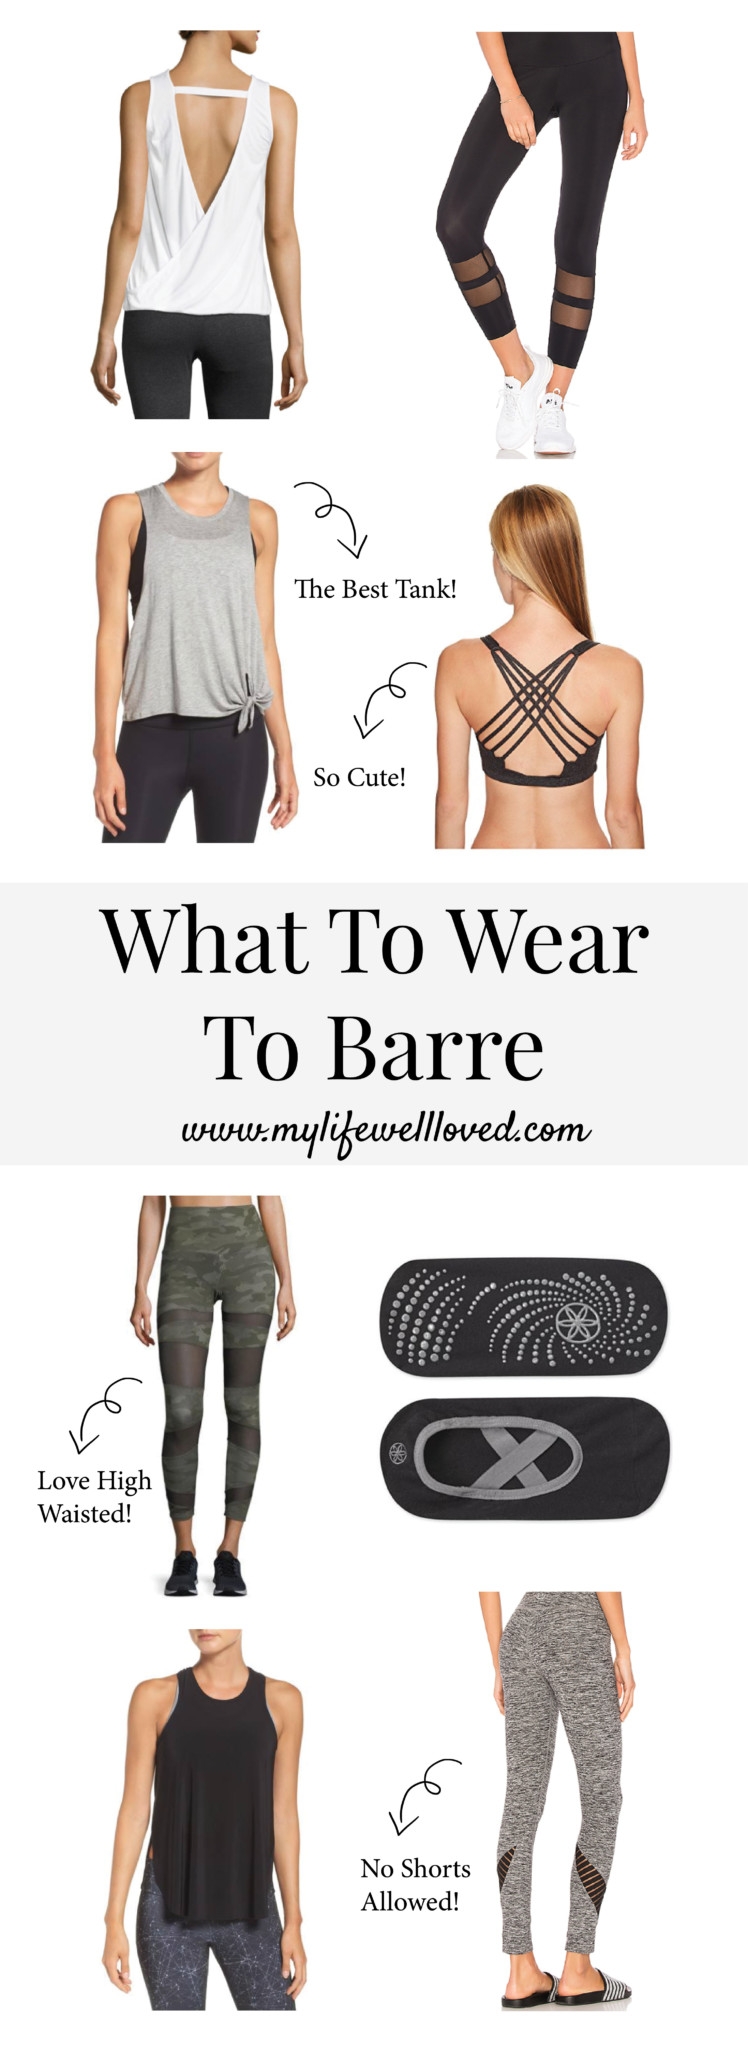 Pure Barre Workout Classes